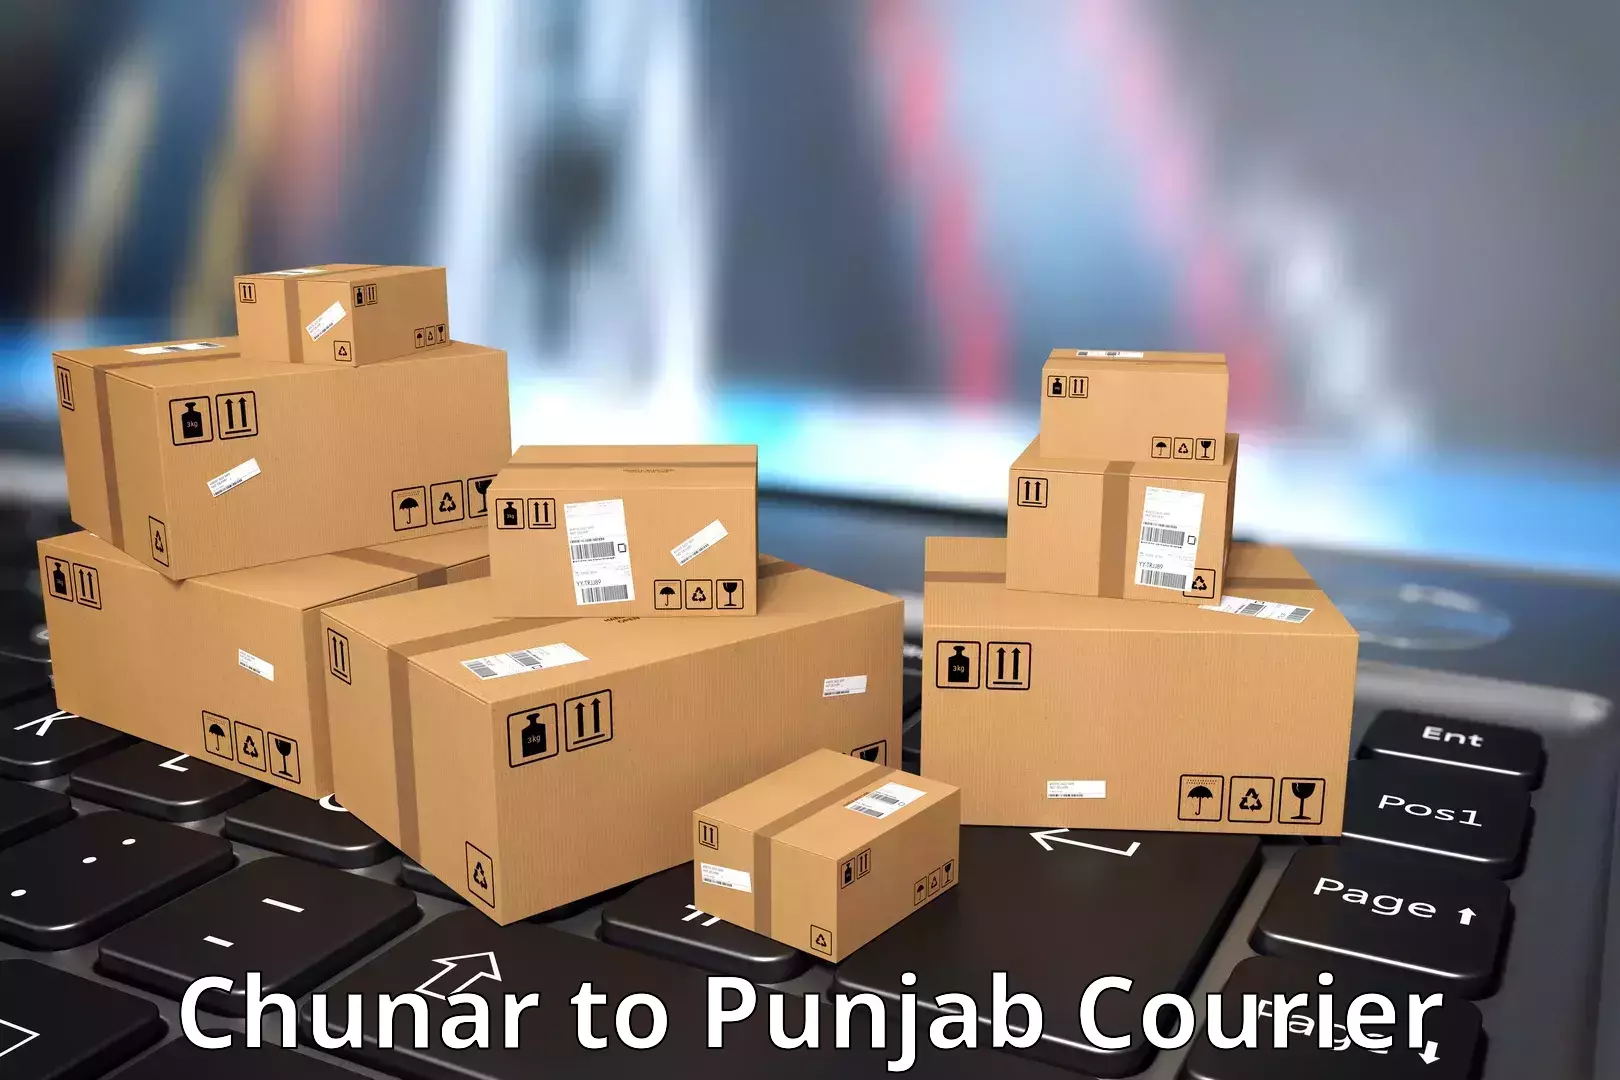 24-hour delivery options Chunar to Central University of Punjab Bathinda